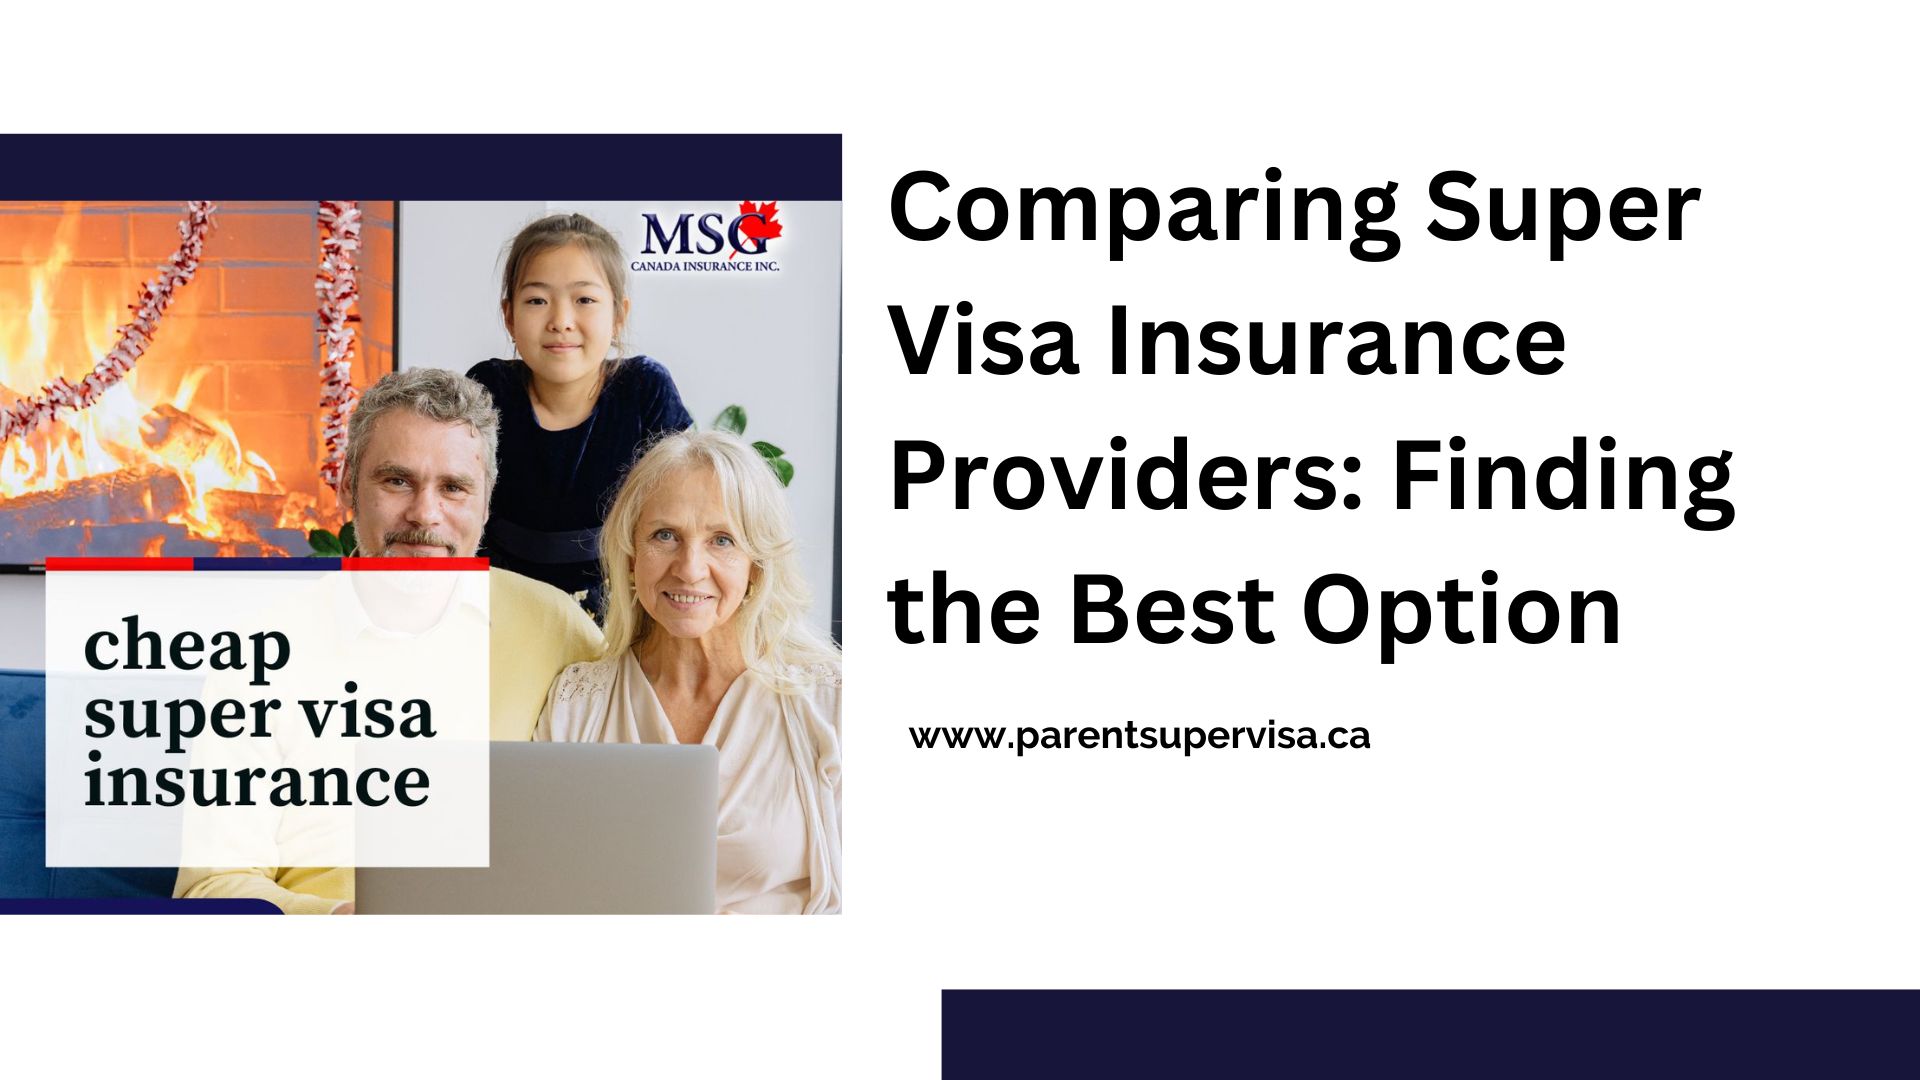 Comparing Super Visa Insurance Providers: Finding the Best Option